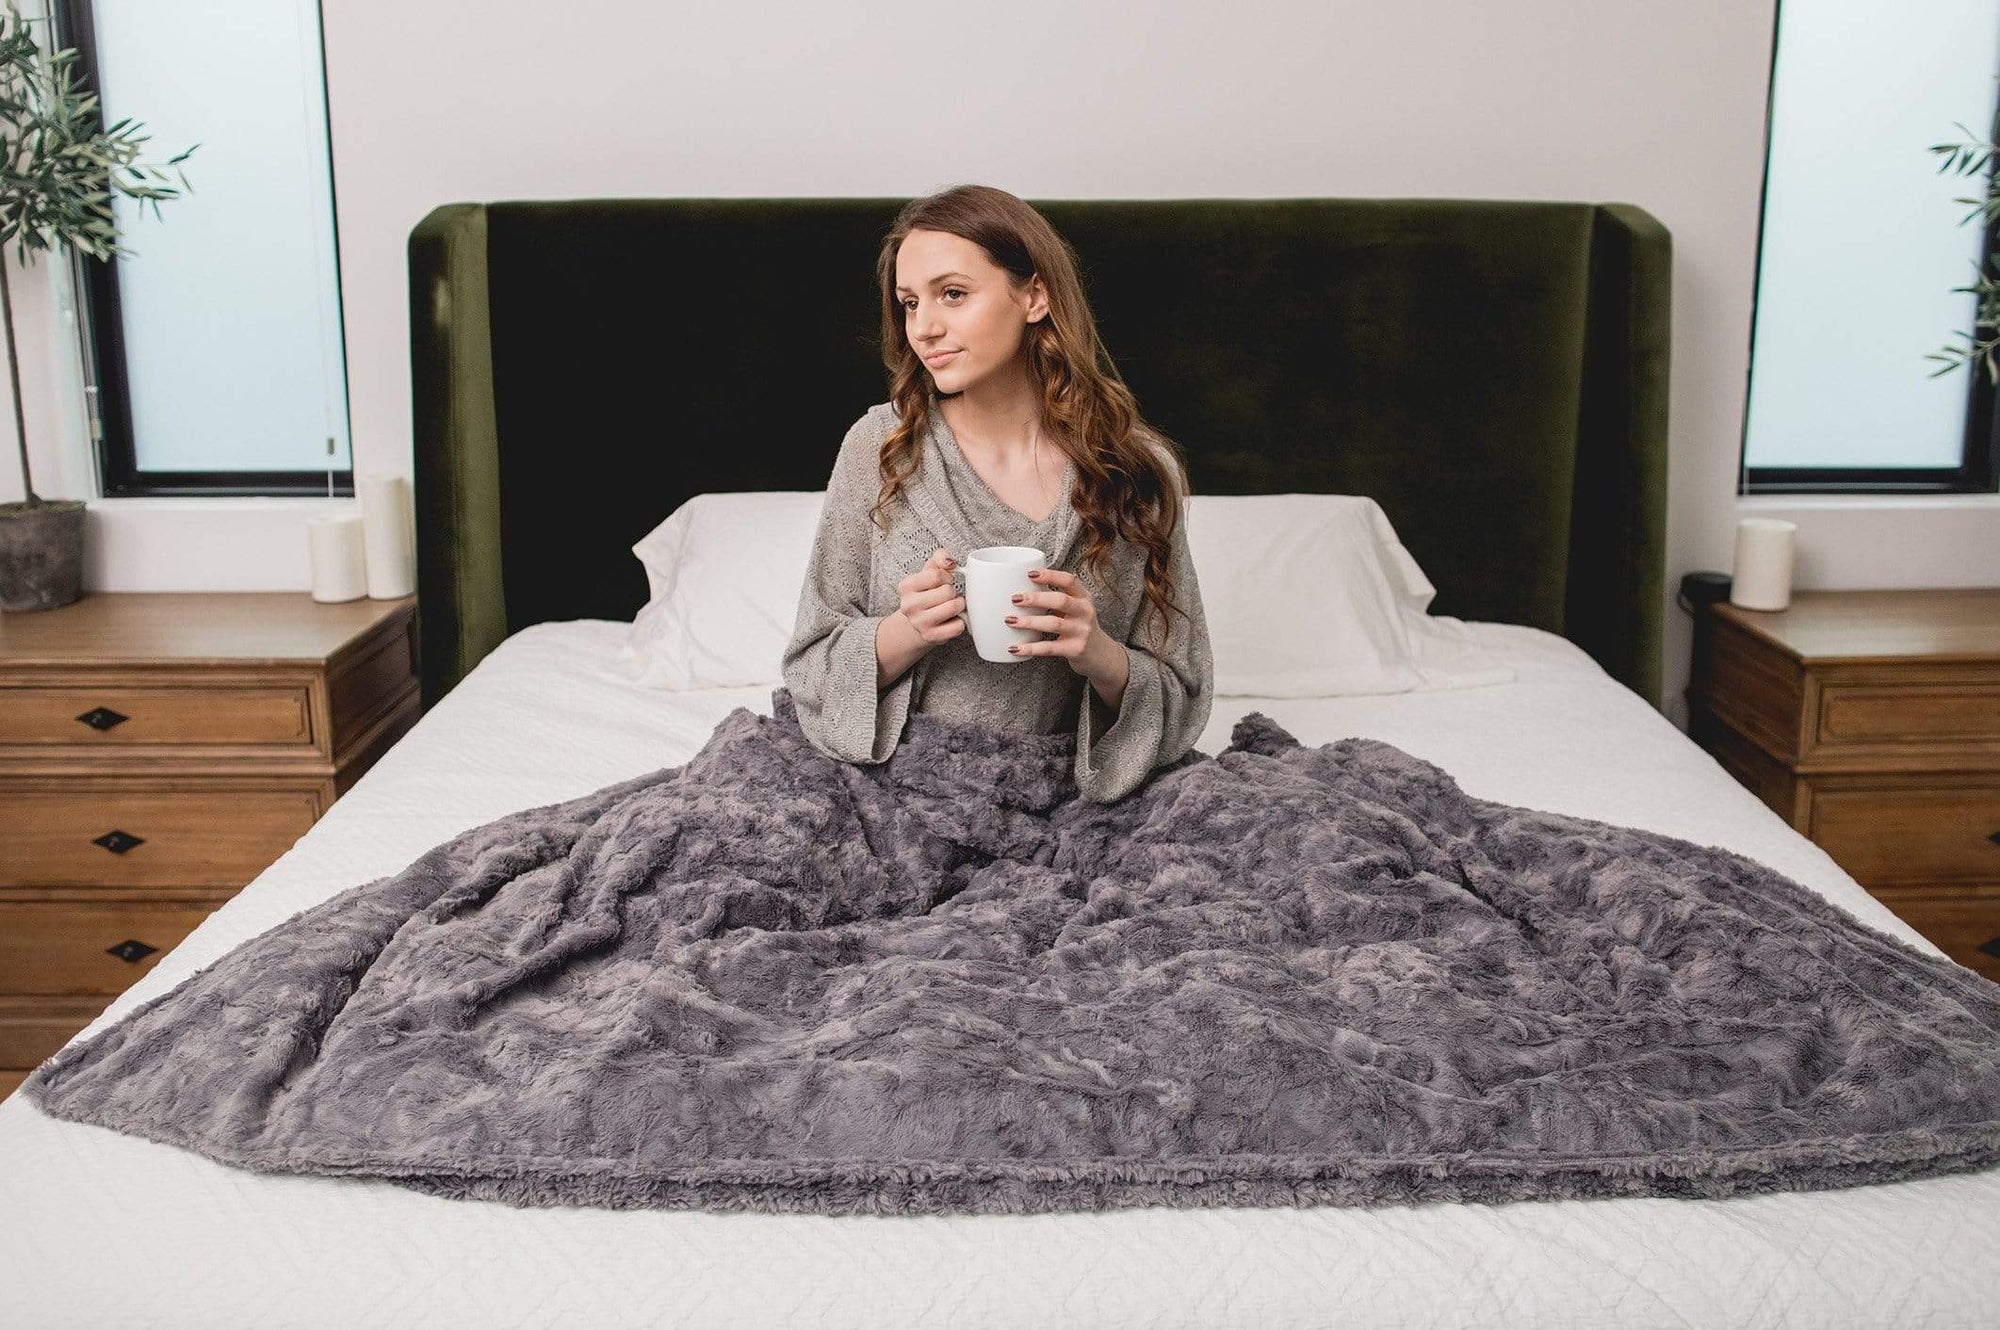 What does a Weighted Blanket Do? How Do They Work?